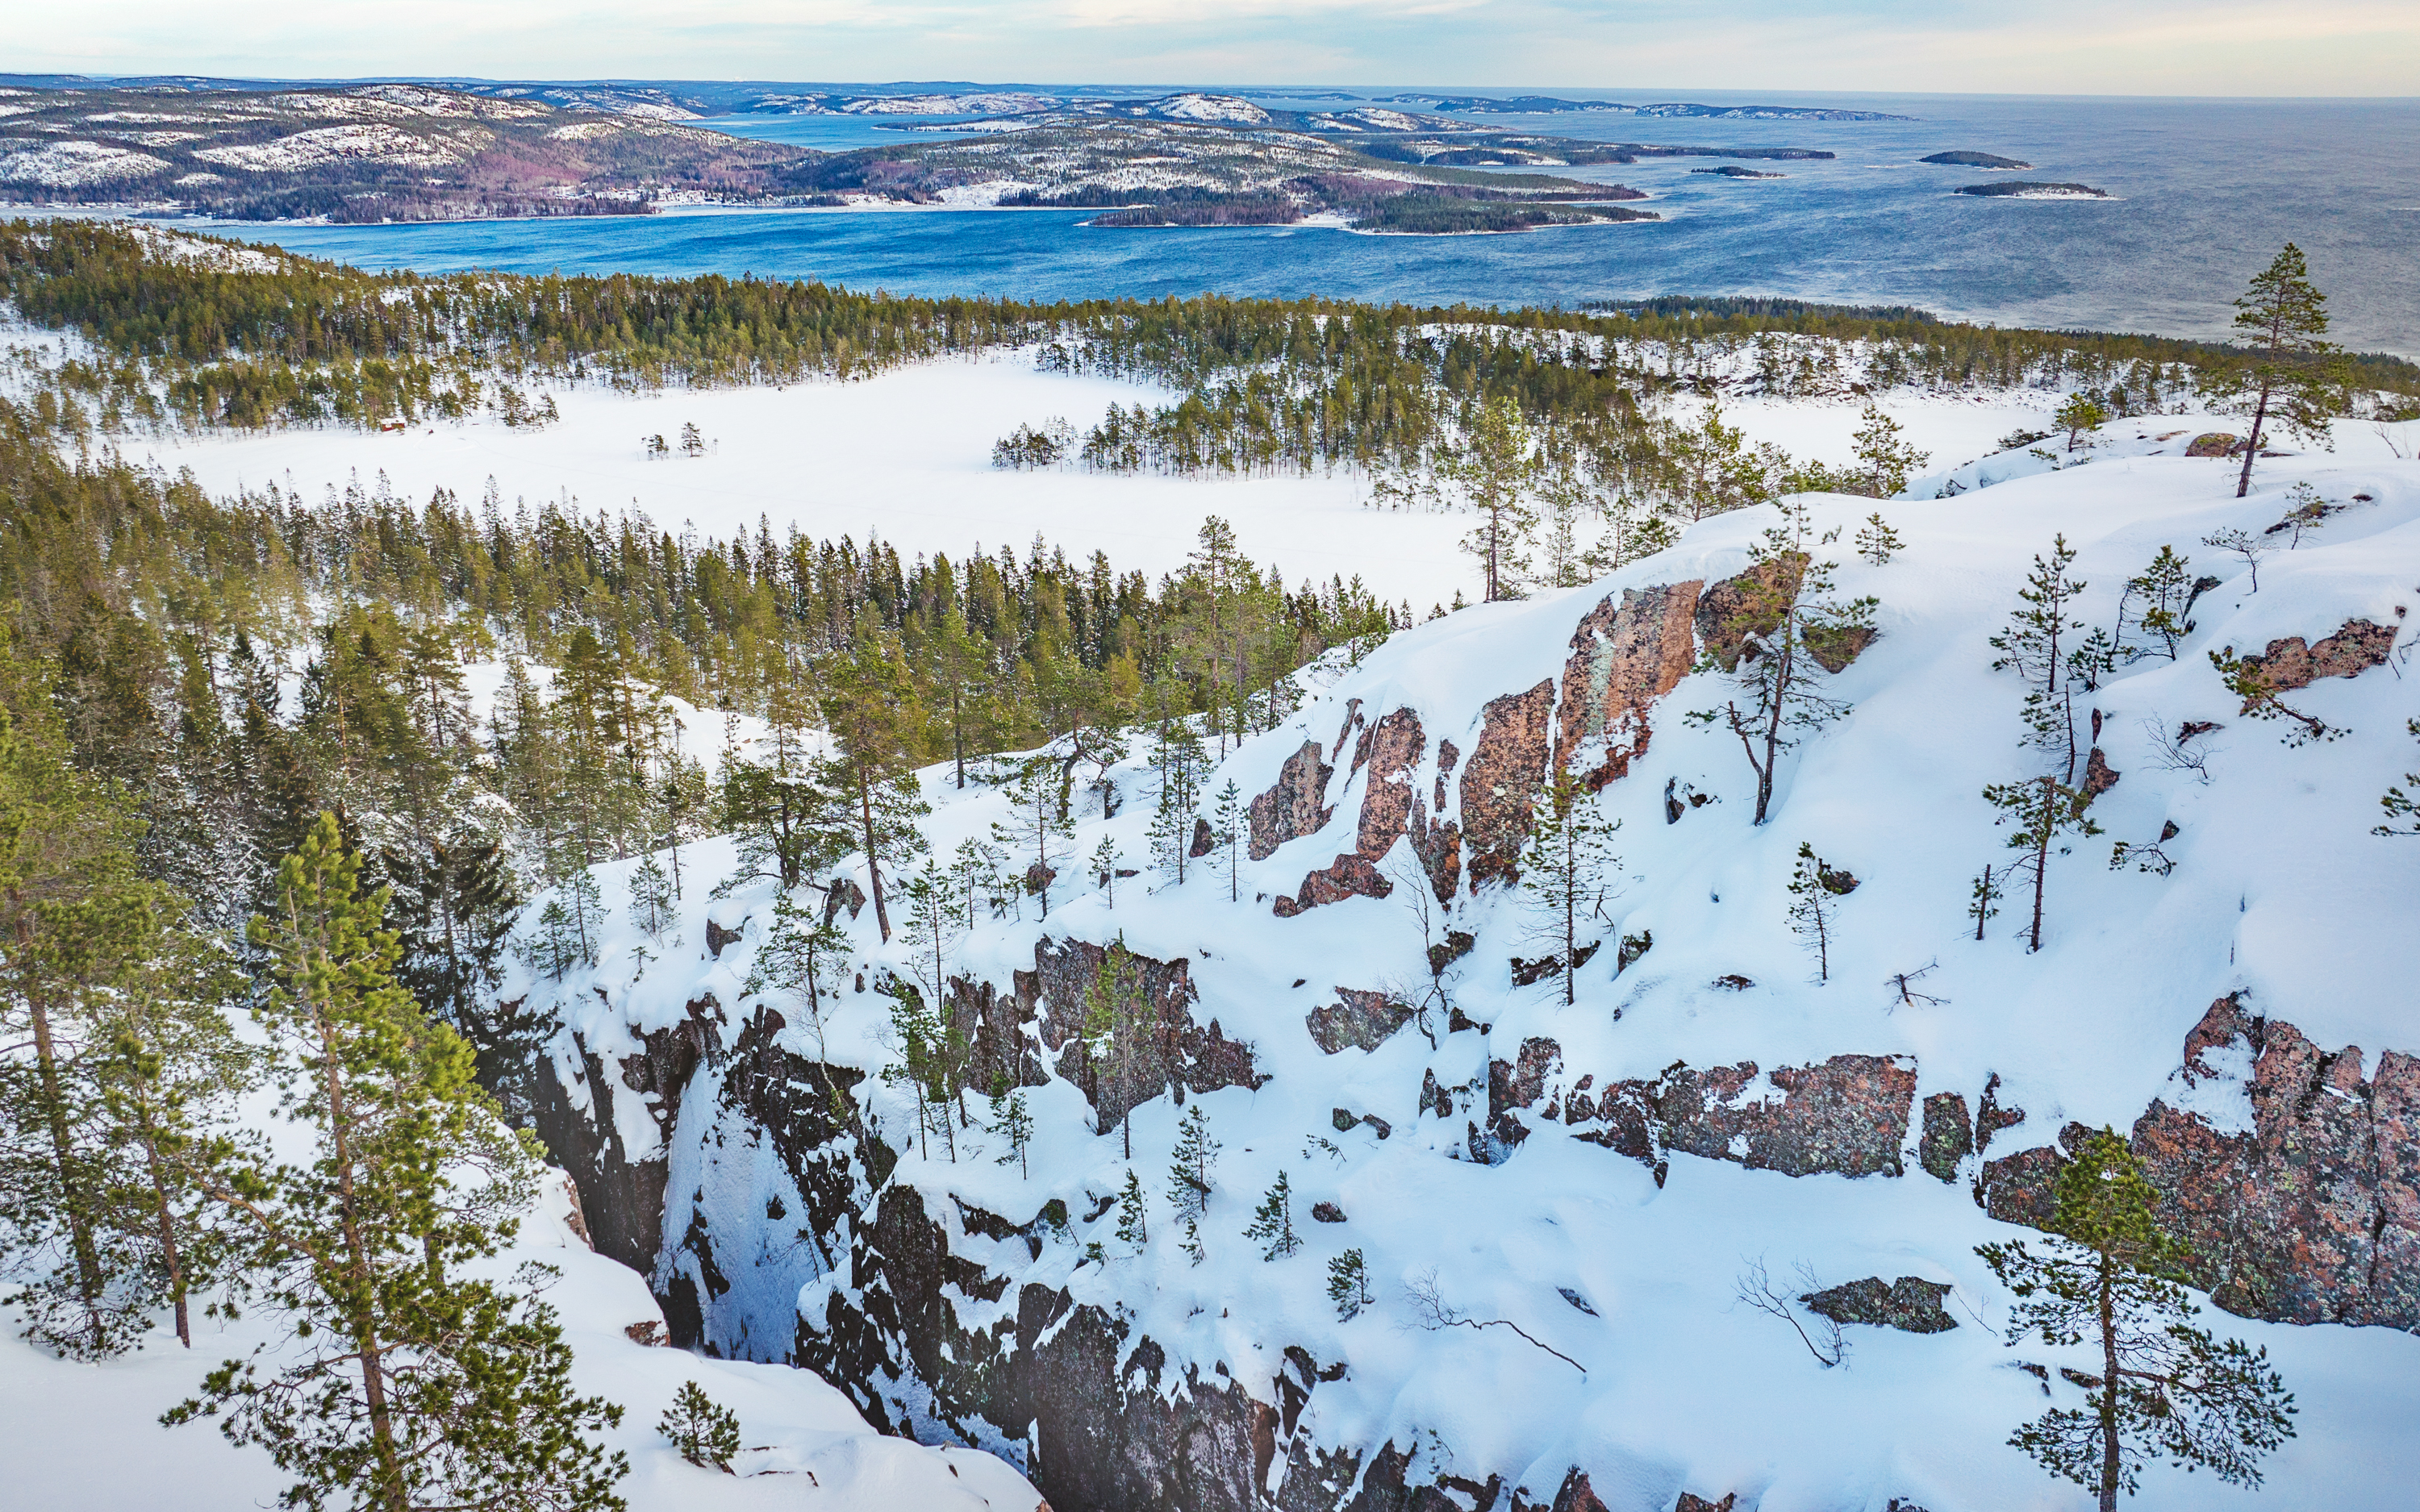 View over cliffs and forest covered with snow.